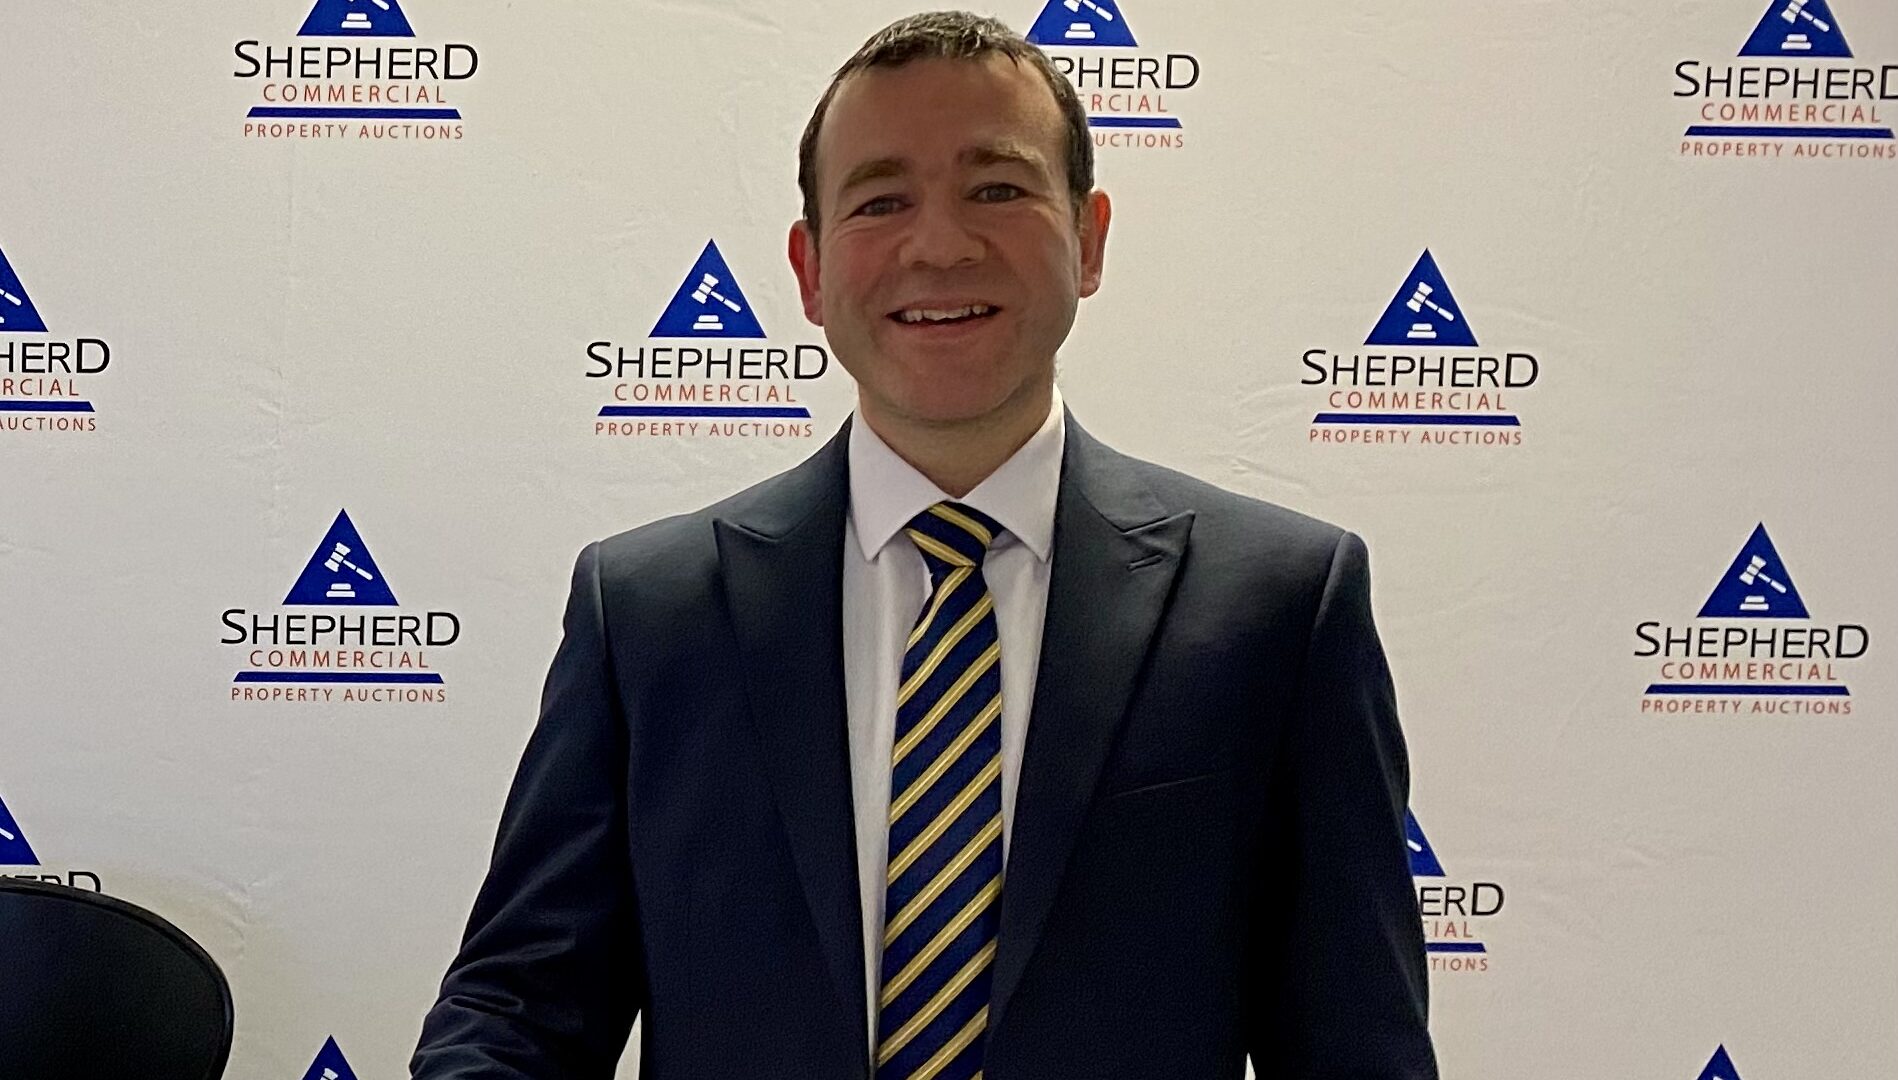 Shepherd tops commercial property search expert’s disposals report for second year in succession